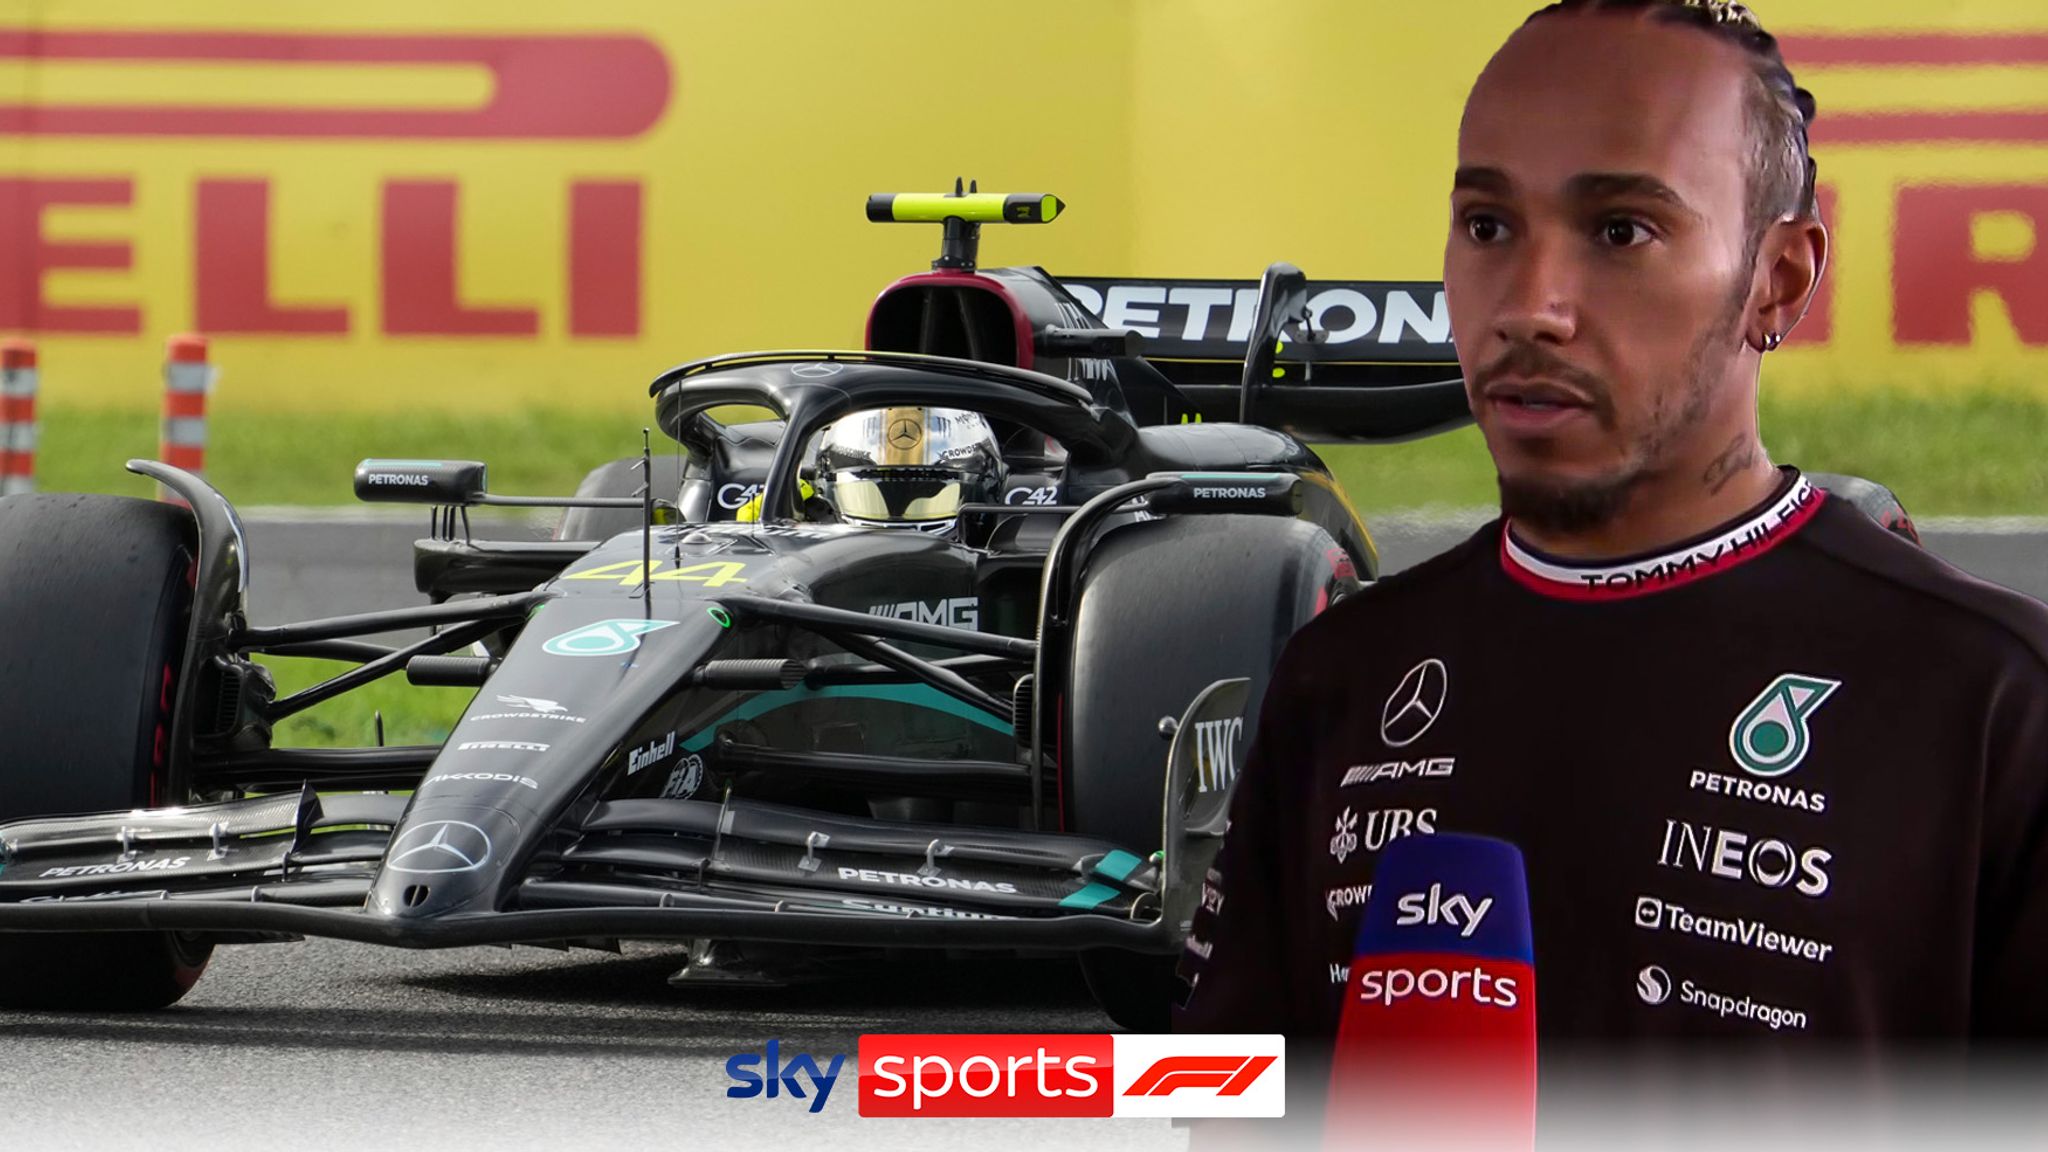 Japanese GP Lewis Hamilton says weakness in Mercedes F1 car exposed at Suzuka after qualifying struggle F1 News